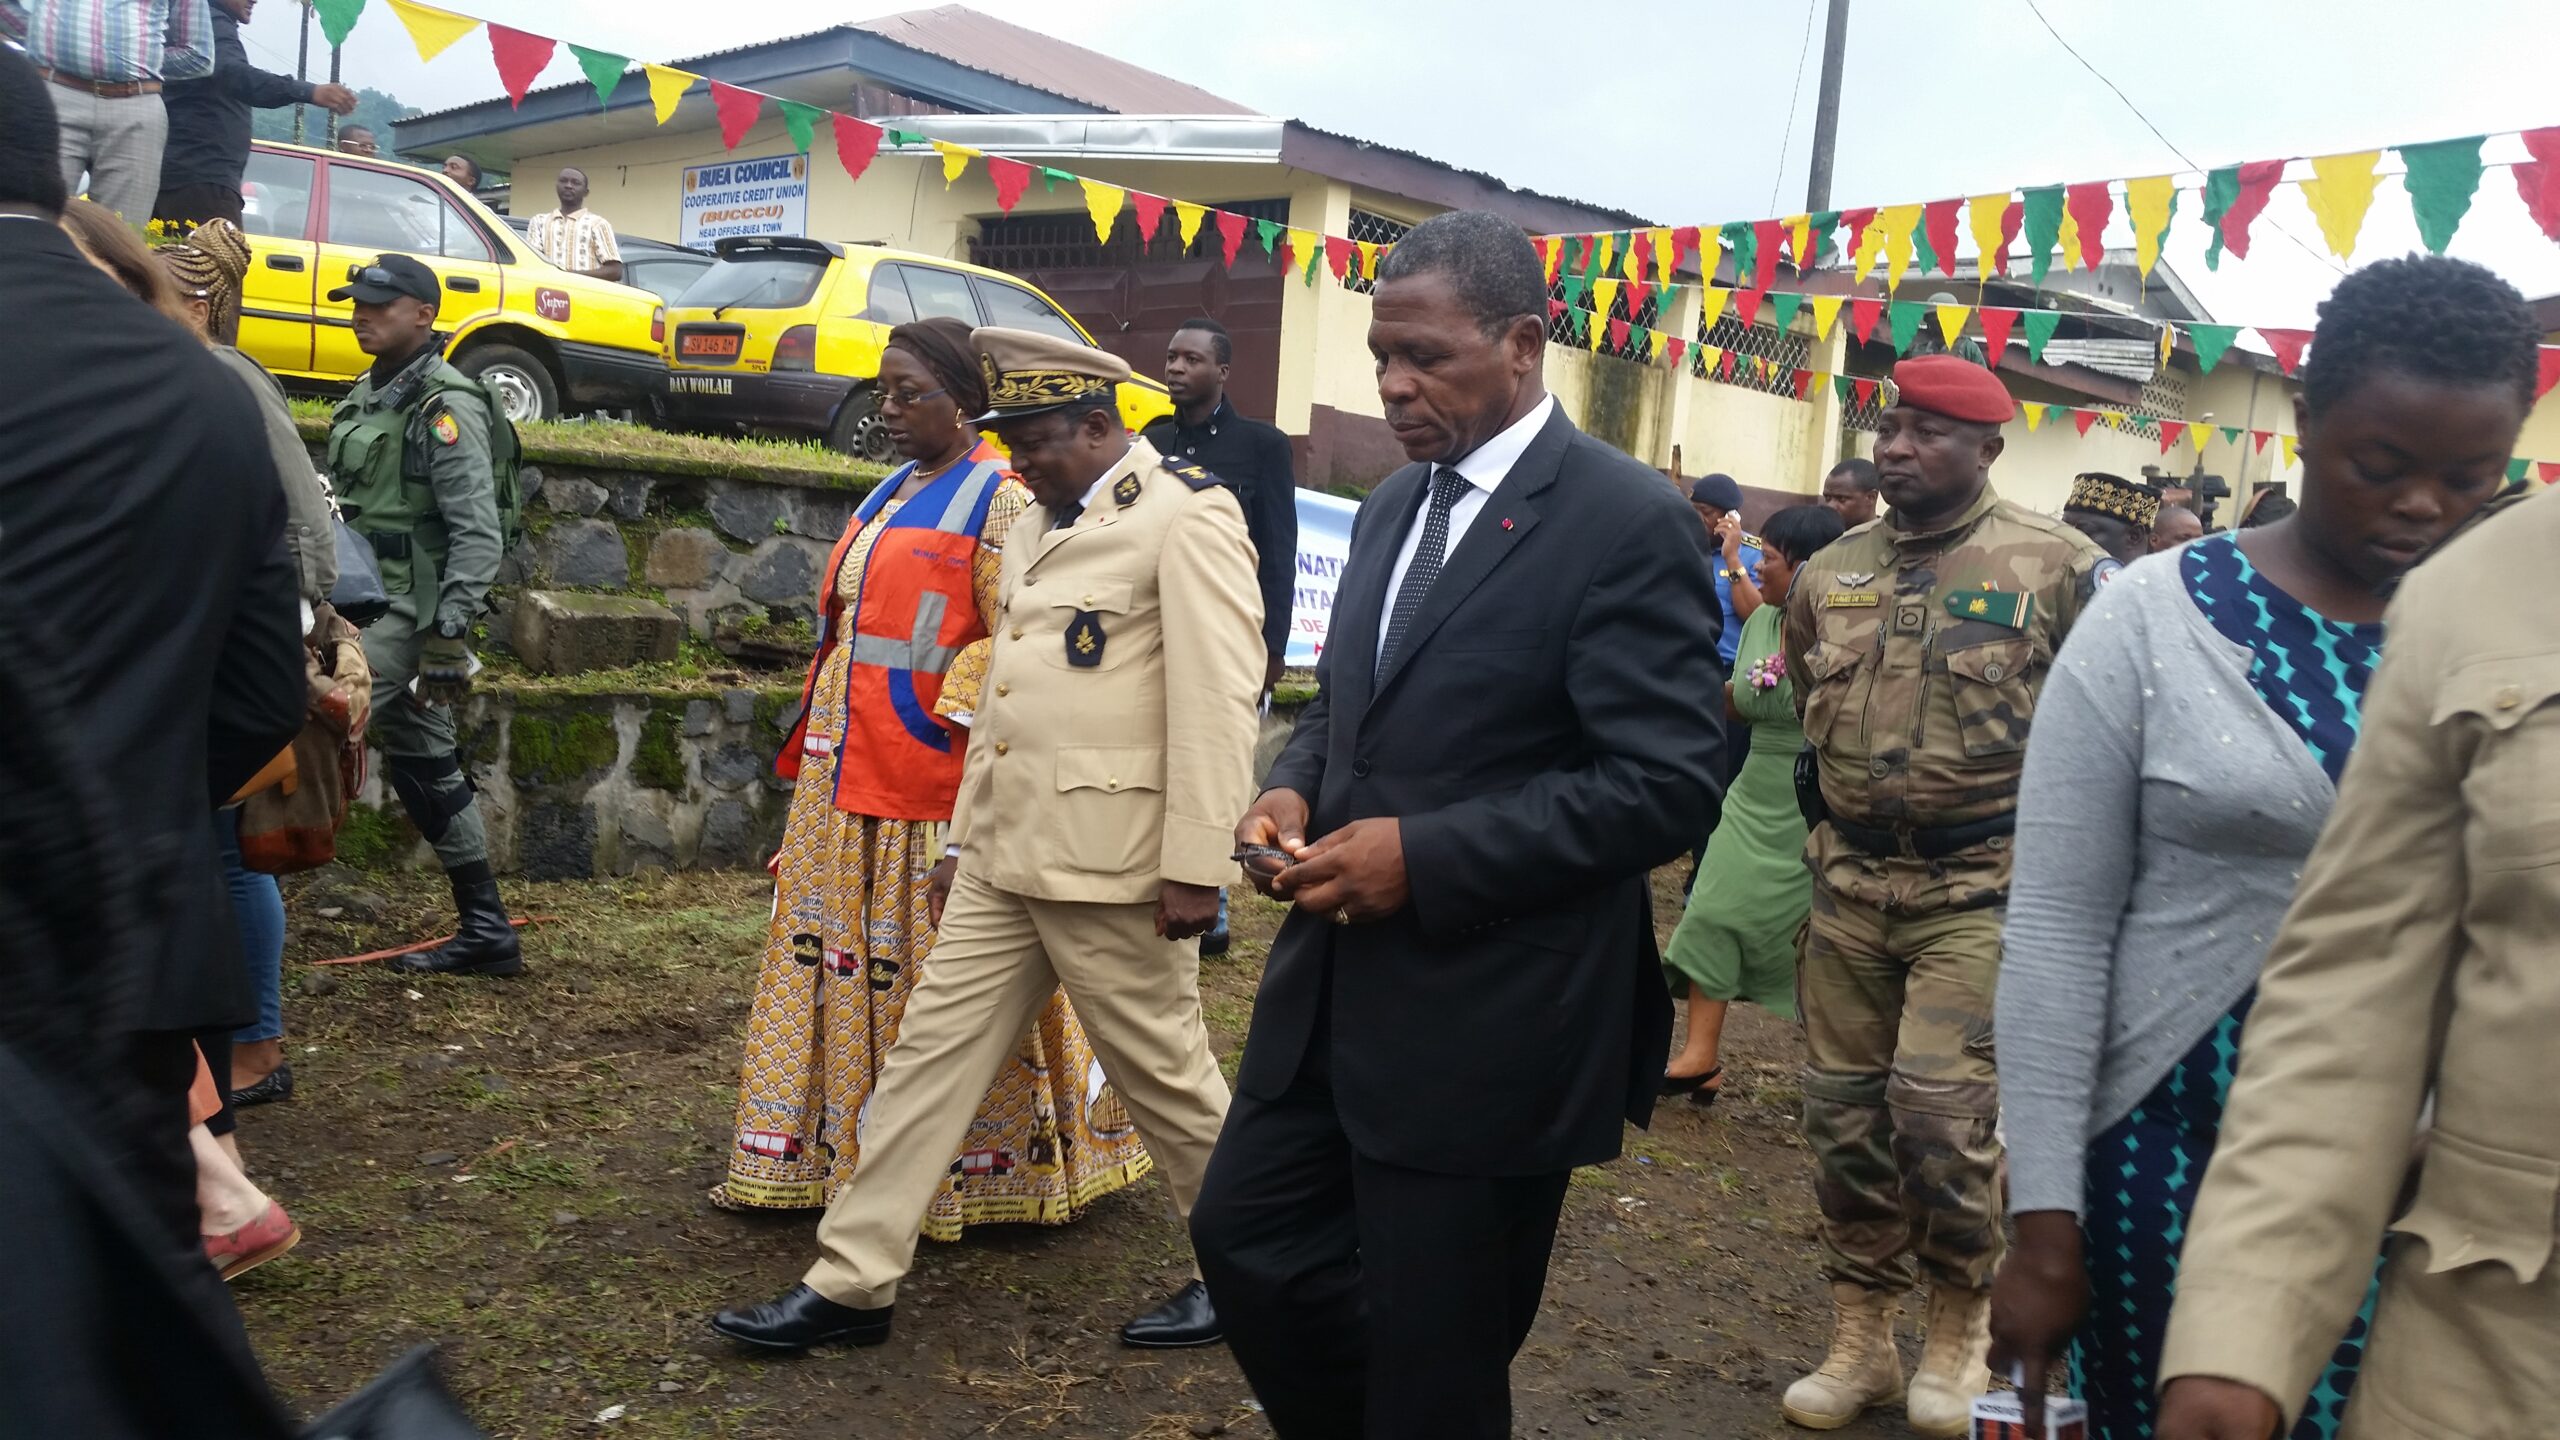 Minister Paul Atanga Nji during his visit to the Coordination center for humanitarian assistance in Buea